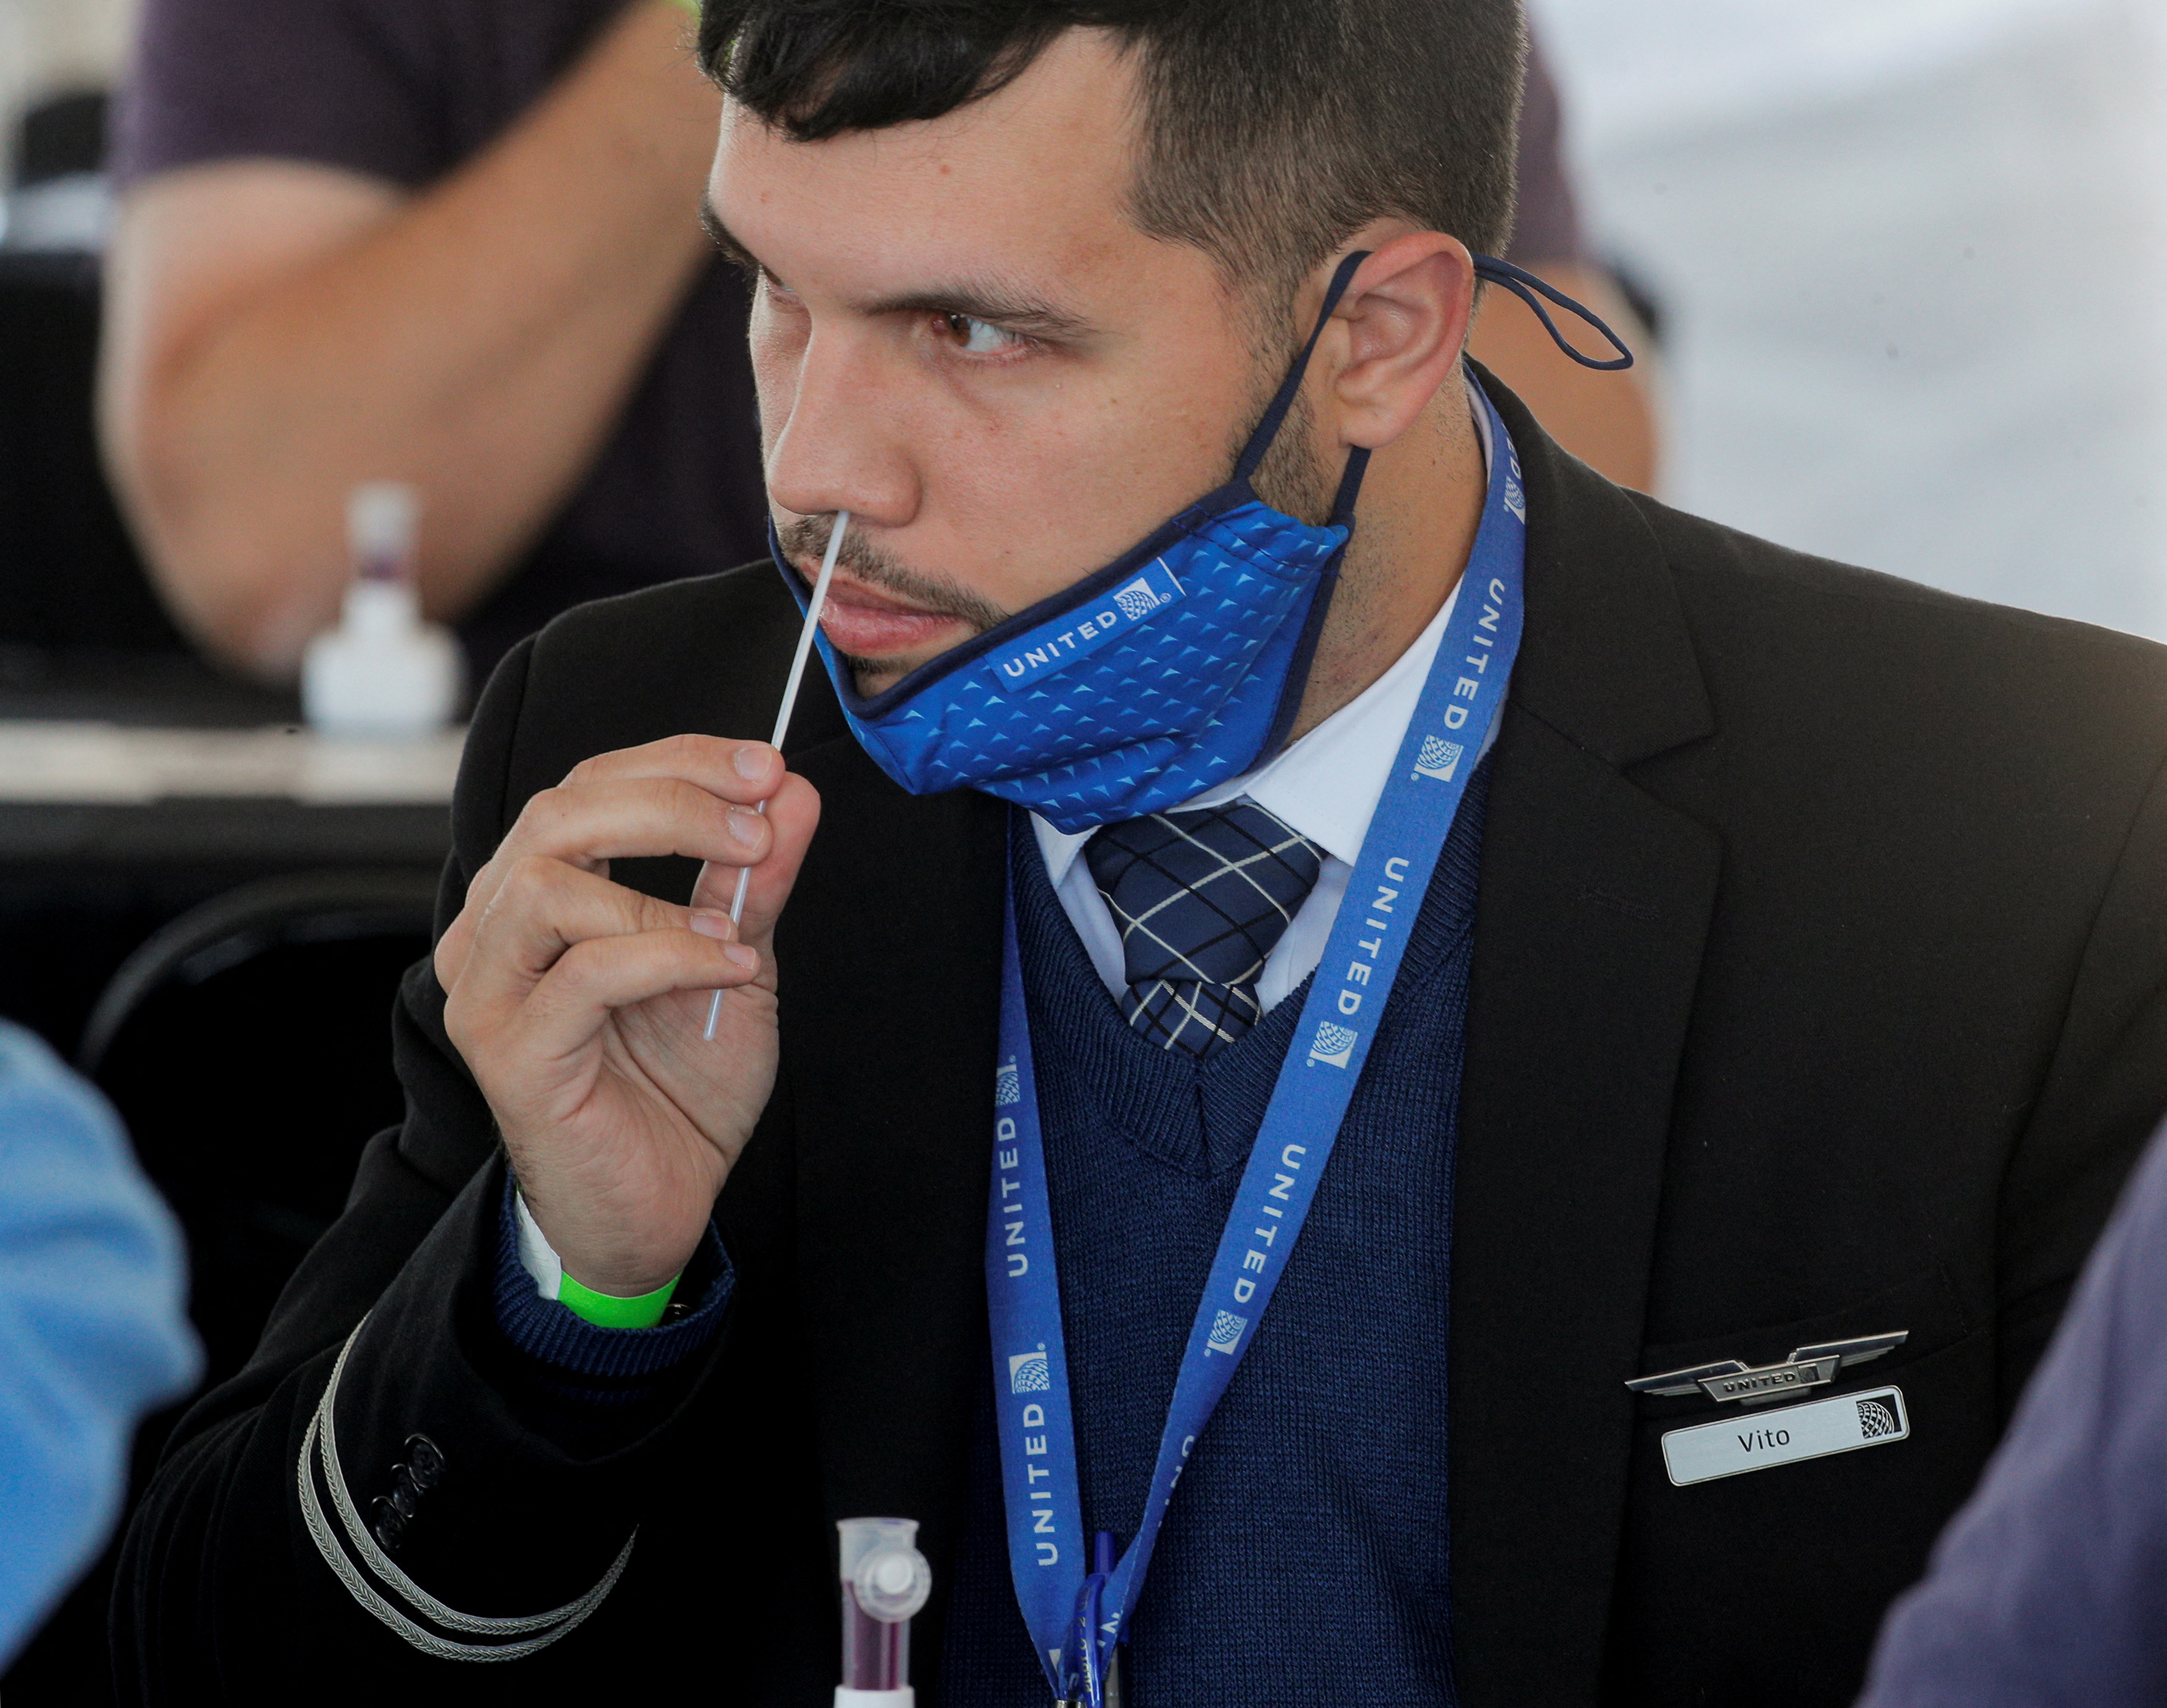 A United Airlines employee swabs his nose for a coronavirus disease (COVID-19) test to attend a mass reunion event at MetLife Stadium in East Rutherford, New Jersey